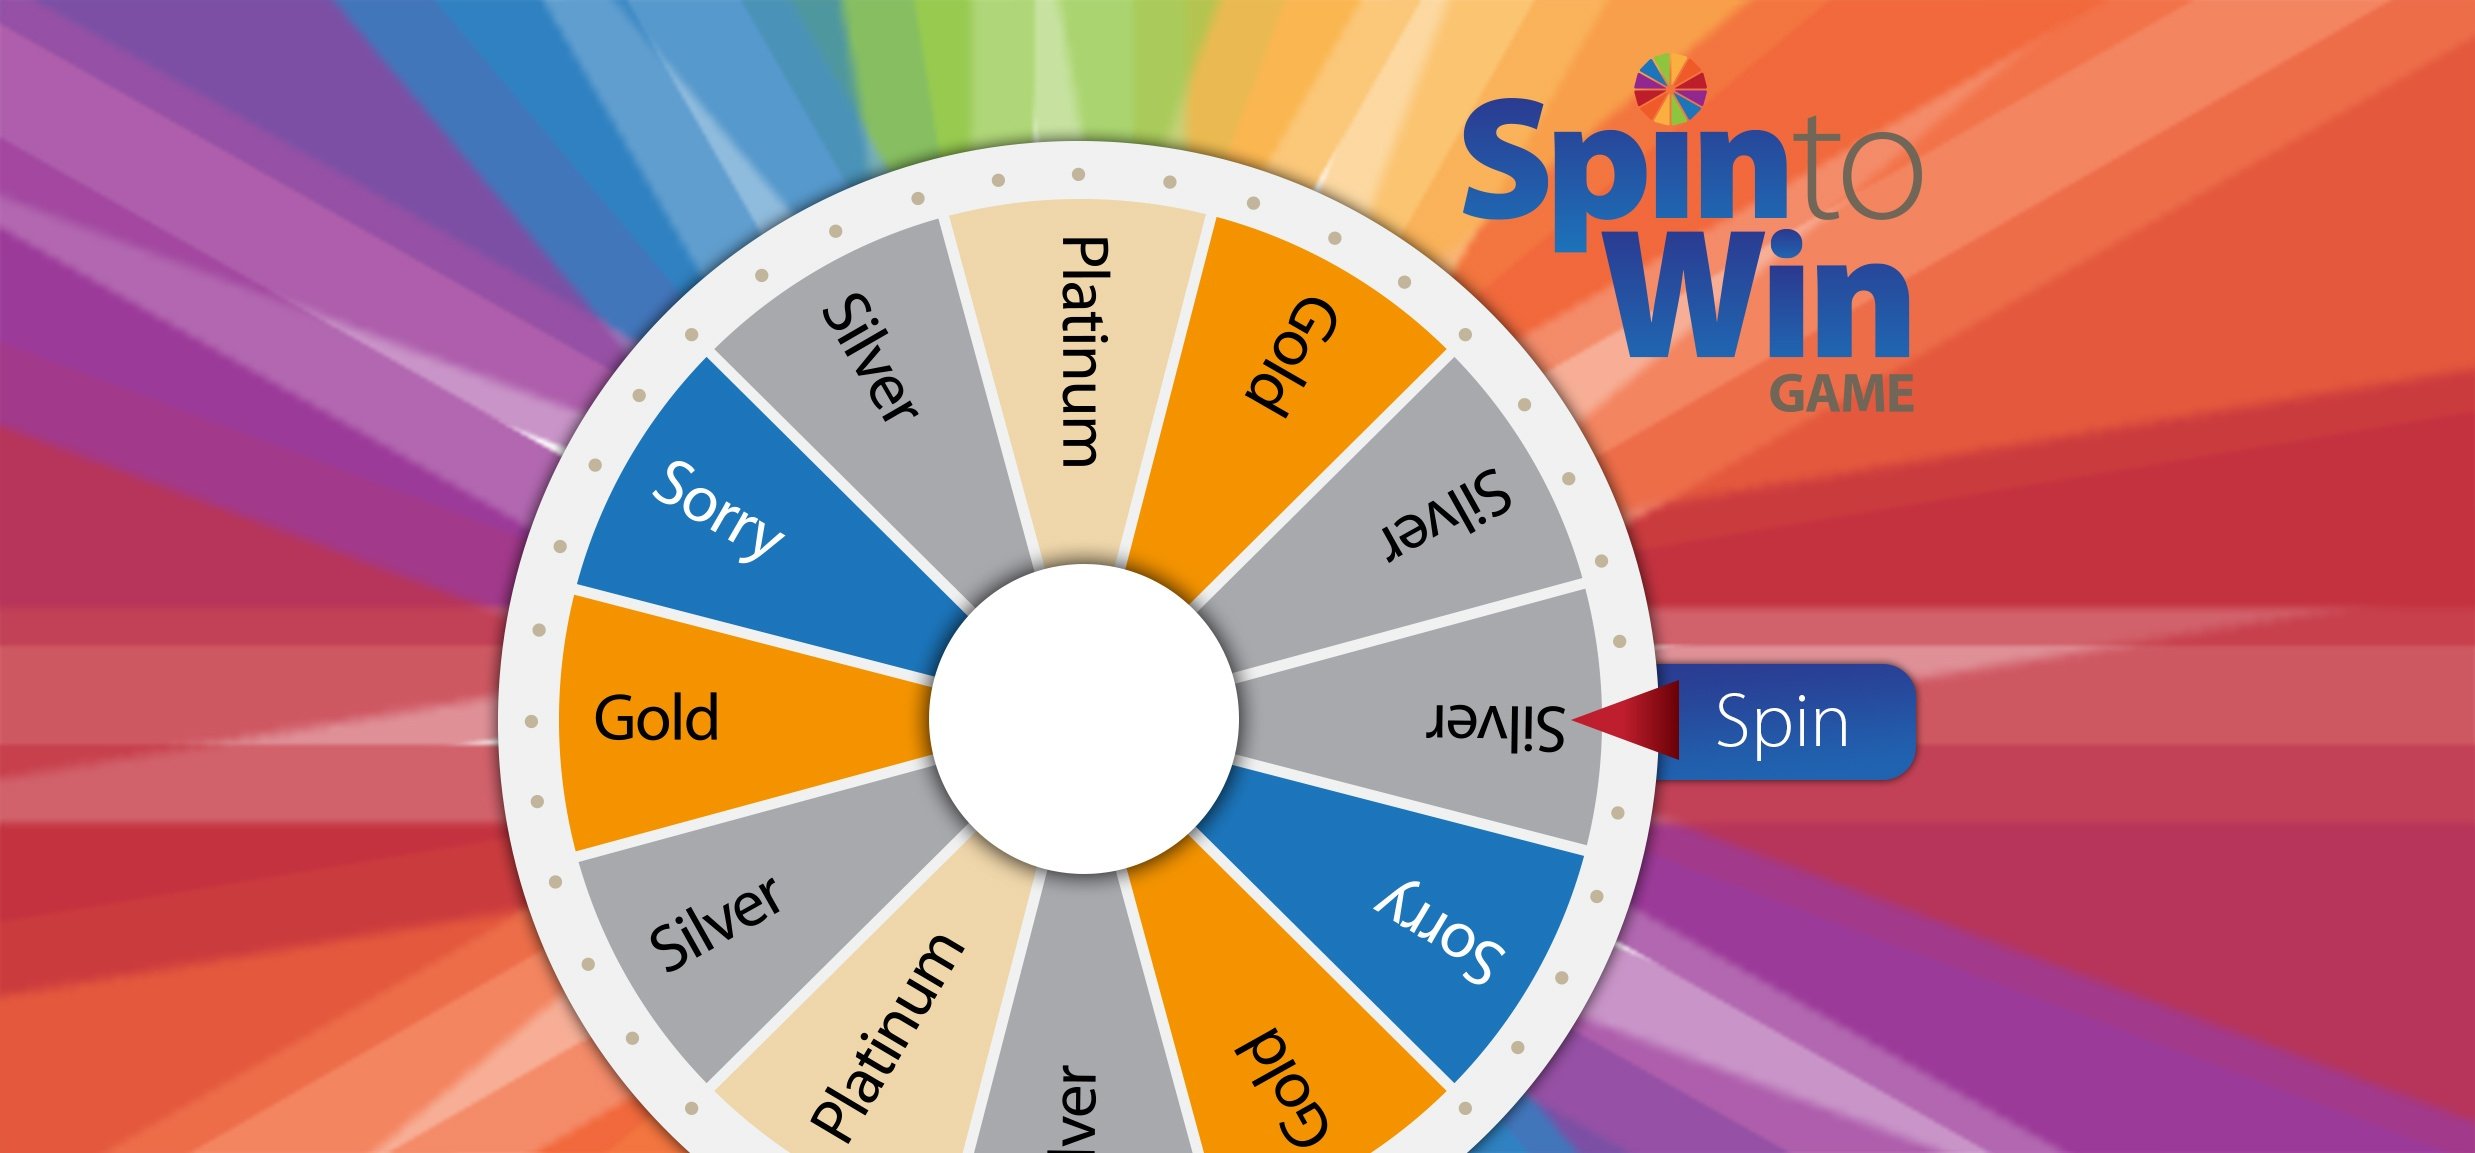 Spin to Win Image.jpg